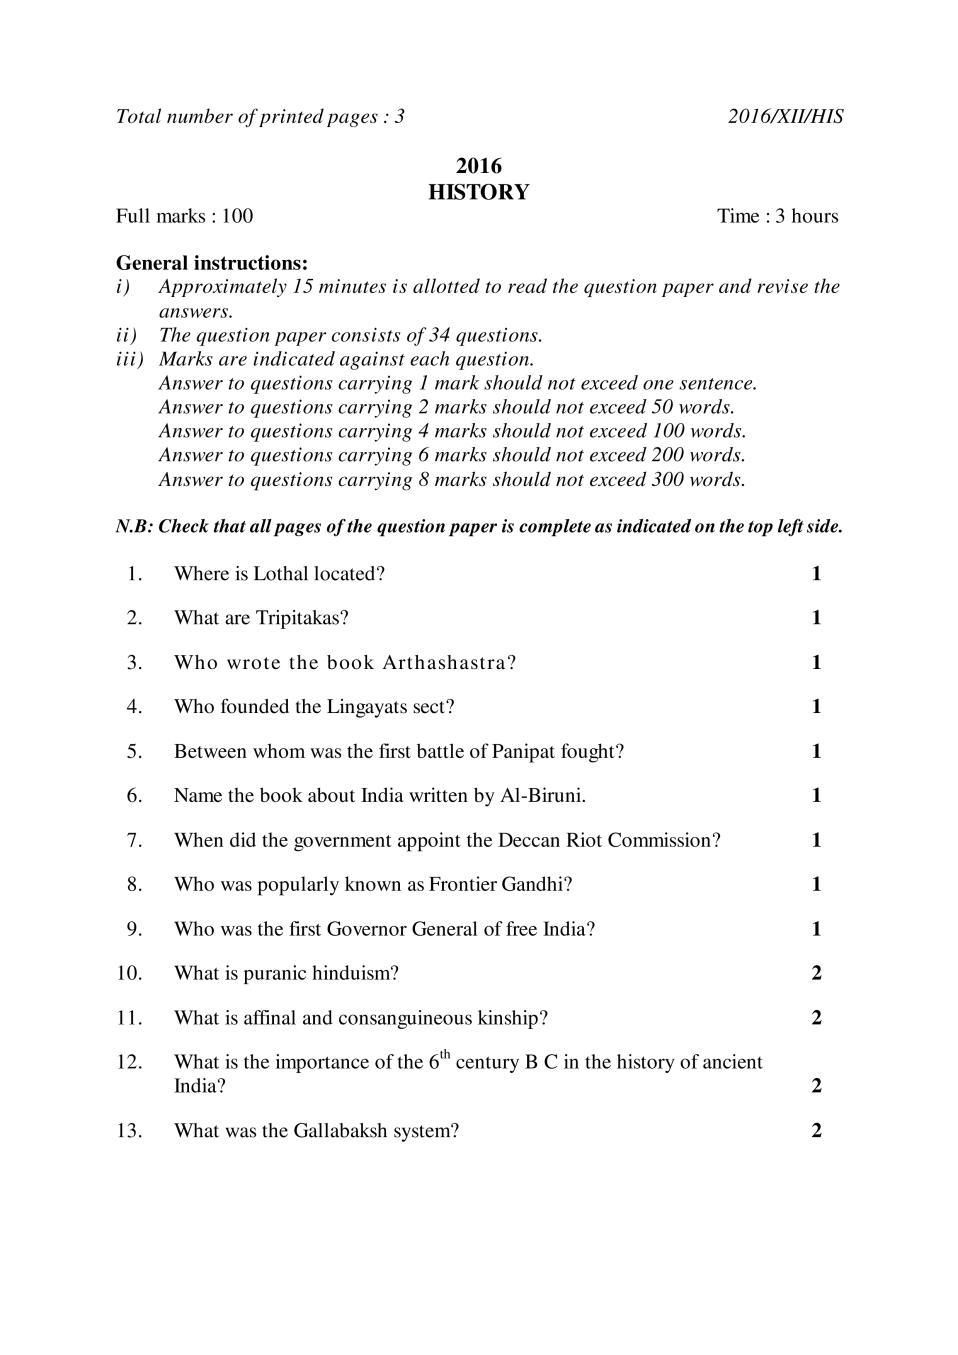 NBSE Class 12 Question Paper 2016 for History - Page 1